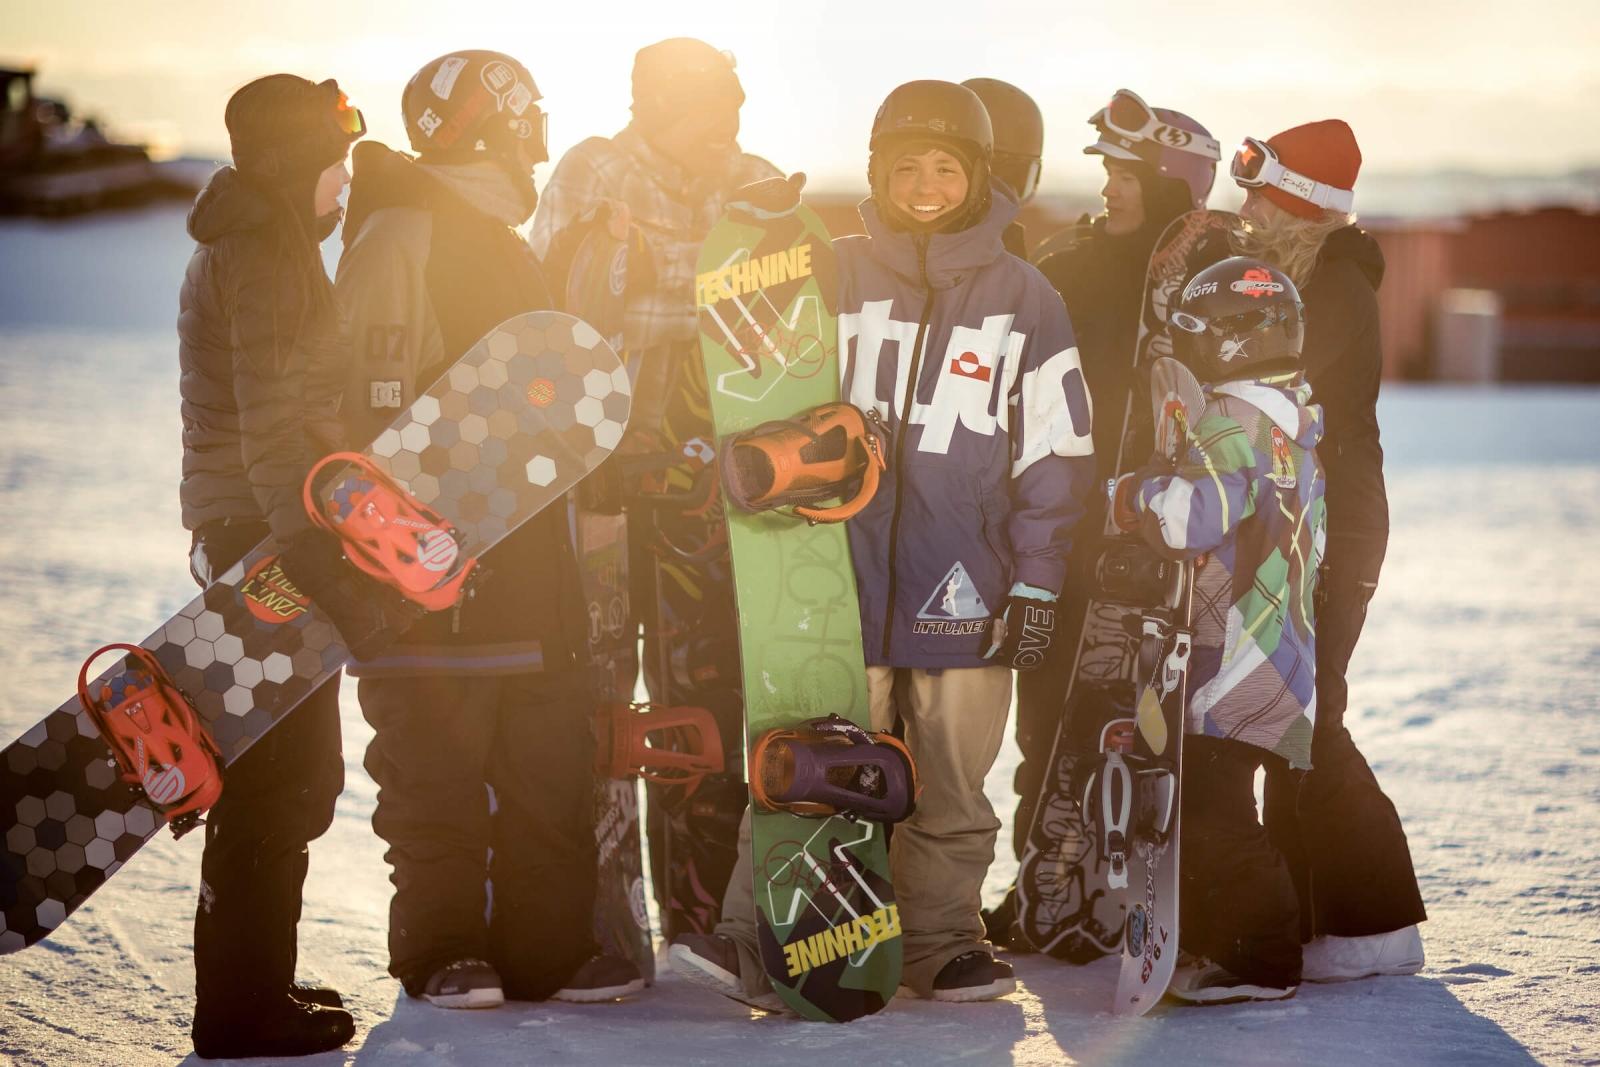 A group of friends from Nuuk hanging out at the snowboard park before the Arctic Winter Games in Greenland. Photo by Mads Pihl